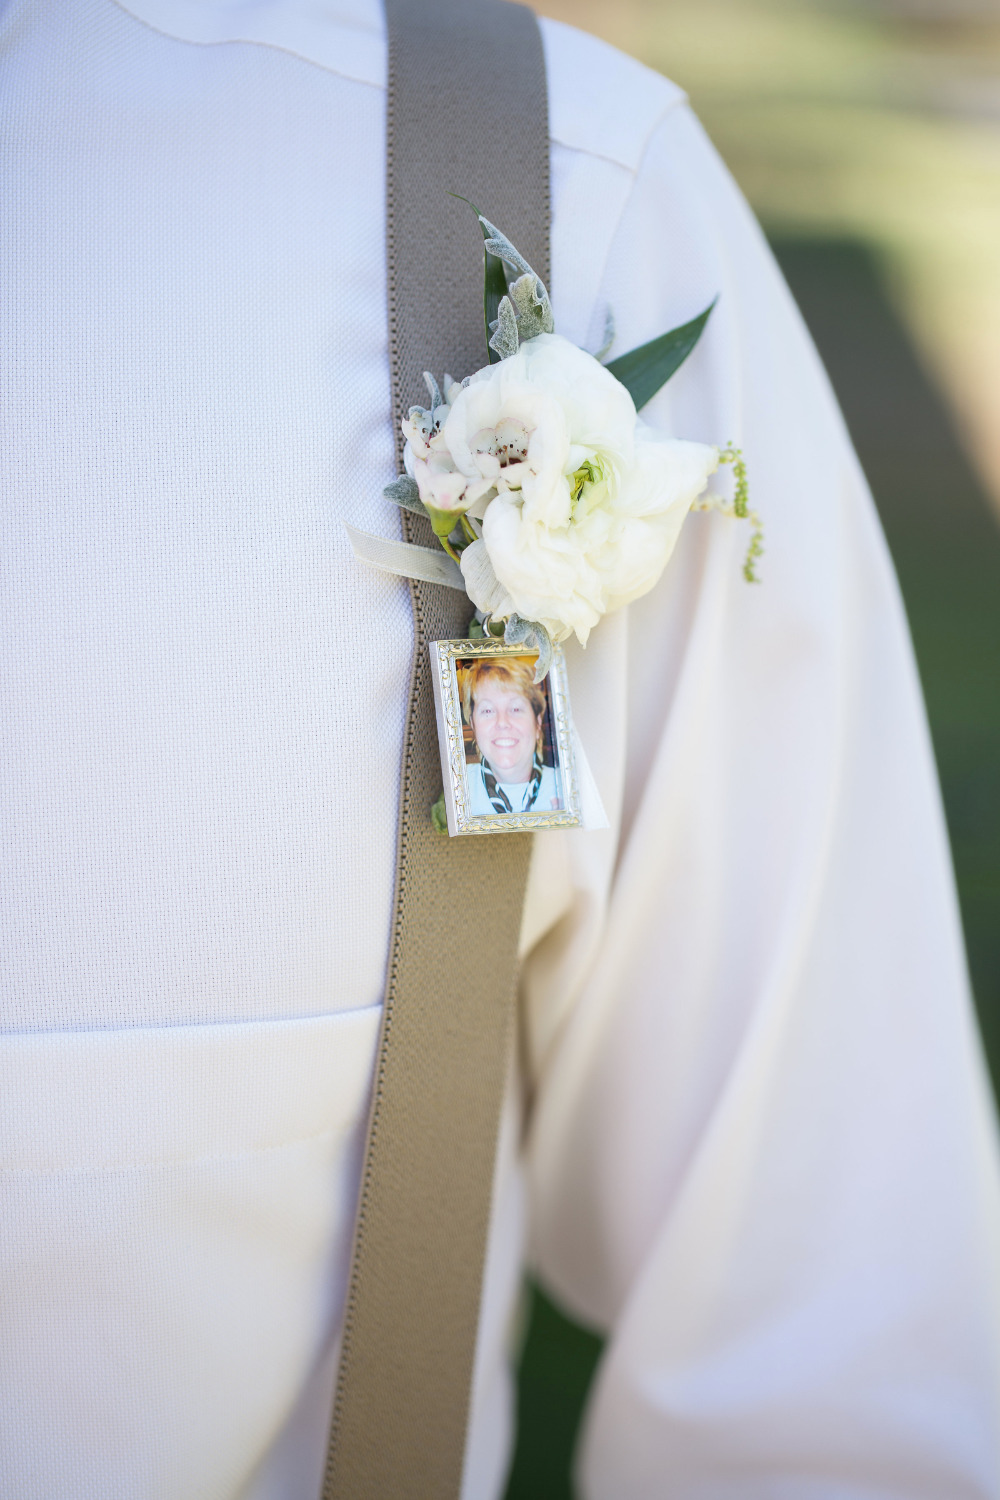 white wedding boutonniere with photo charm